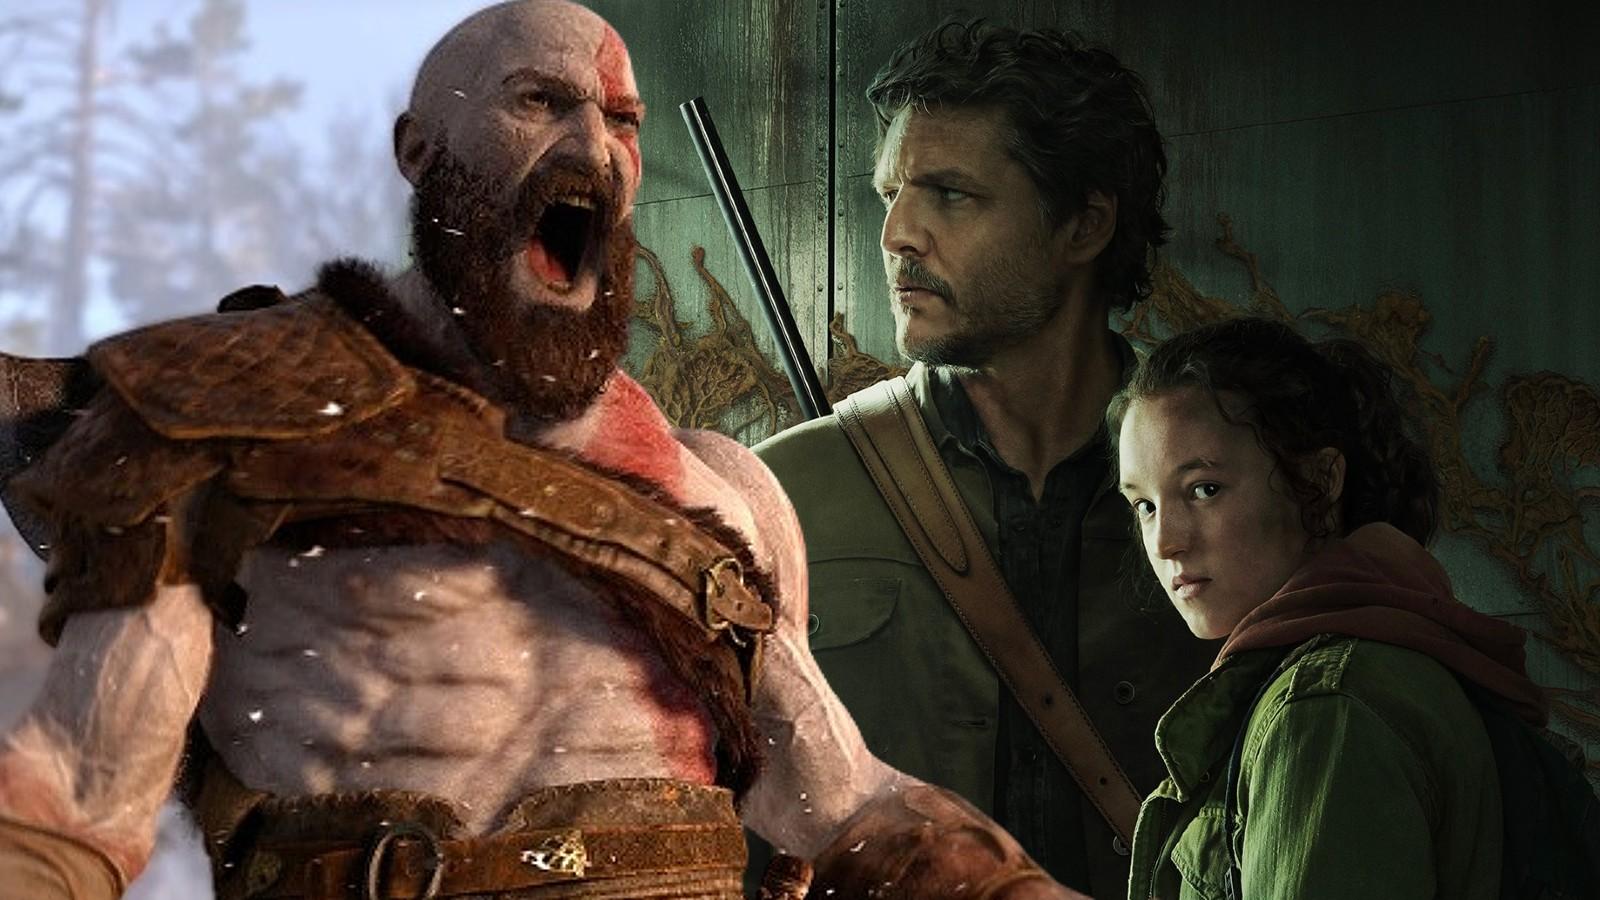 Kratos in God of War and the cast of The Last of Us HBO show